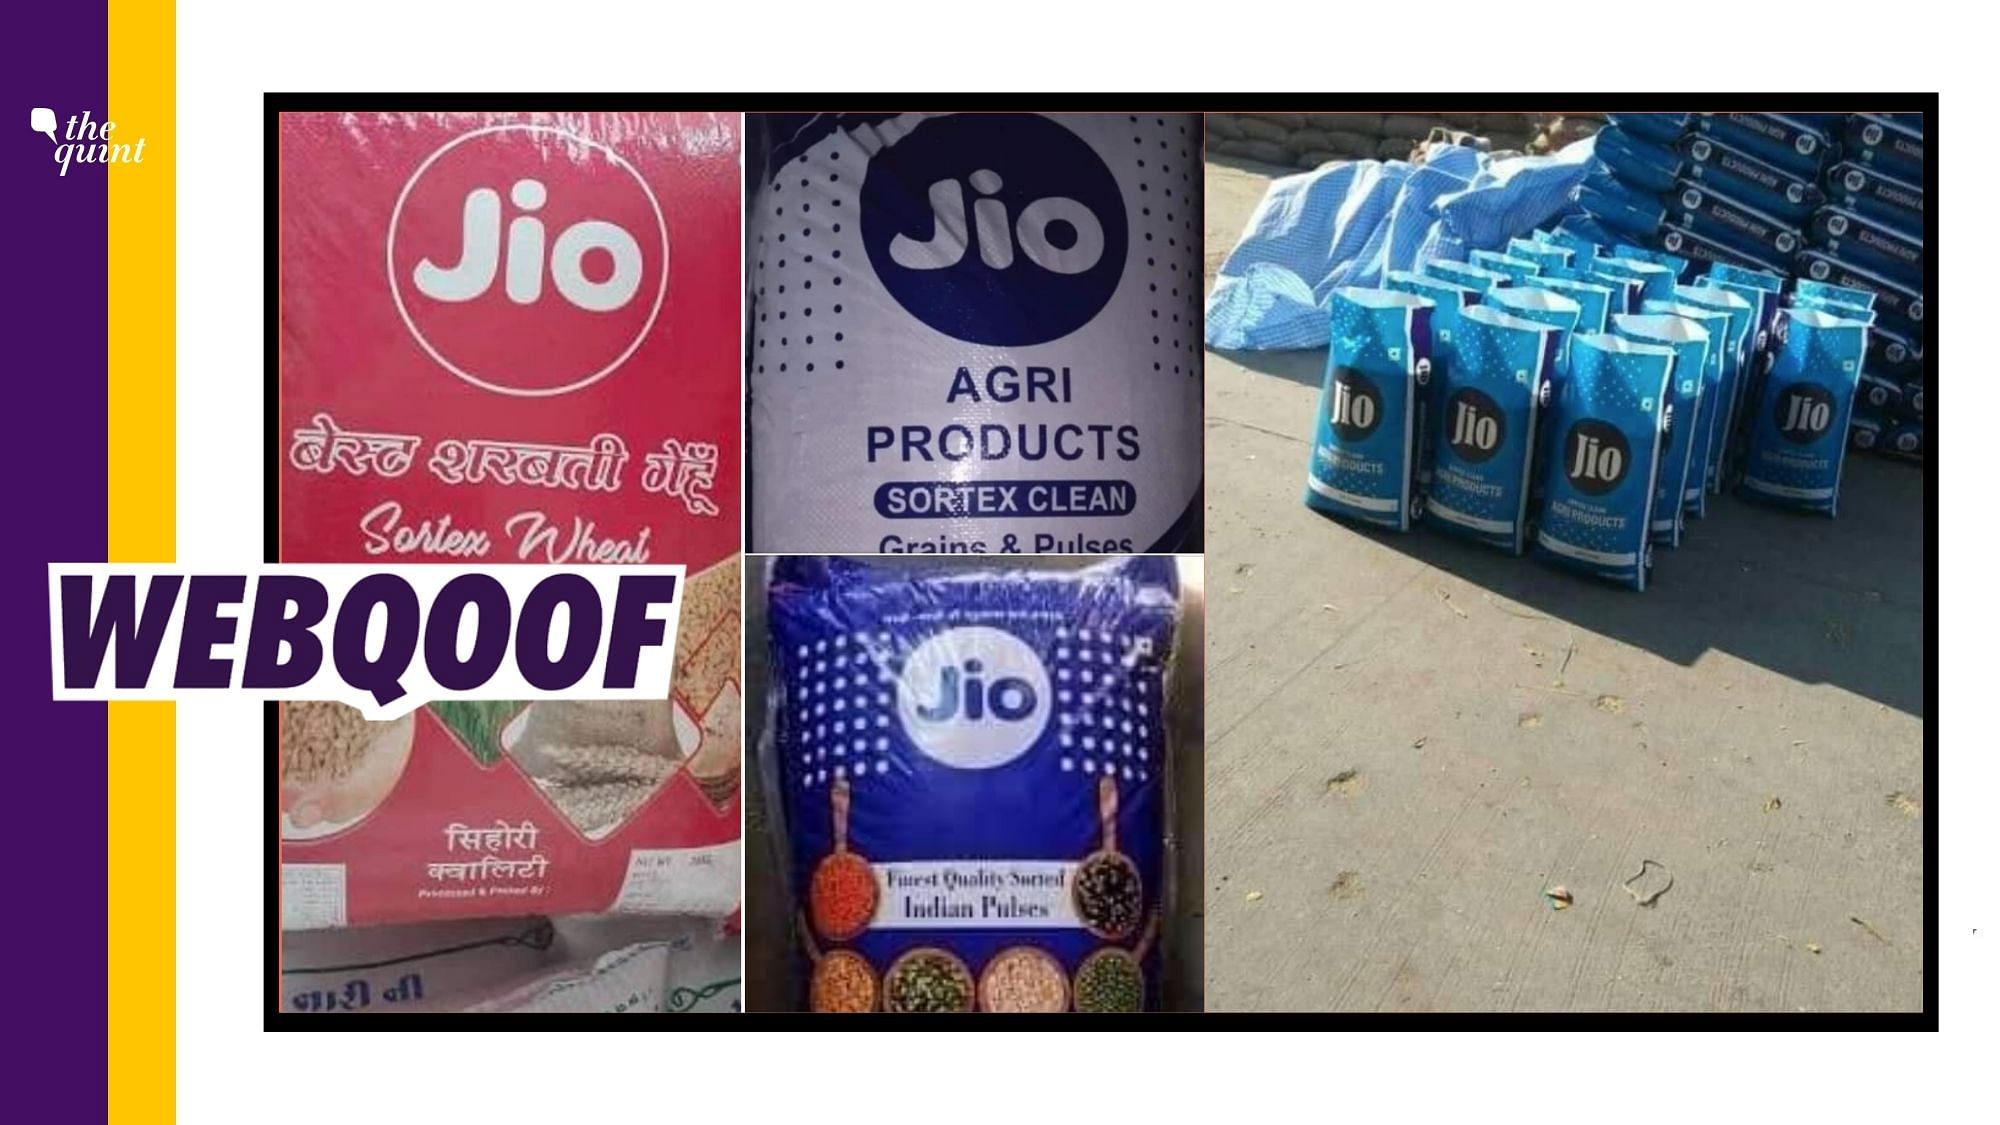 Social media users falsely claimed that viral images are related to Mukesh Ambani’s Reliance Jio.